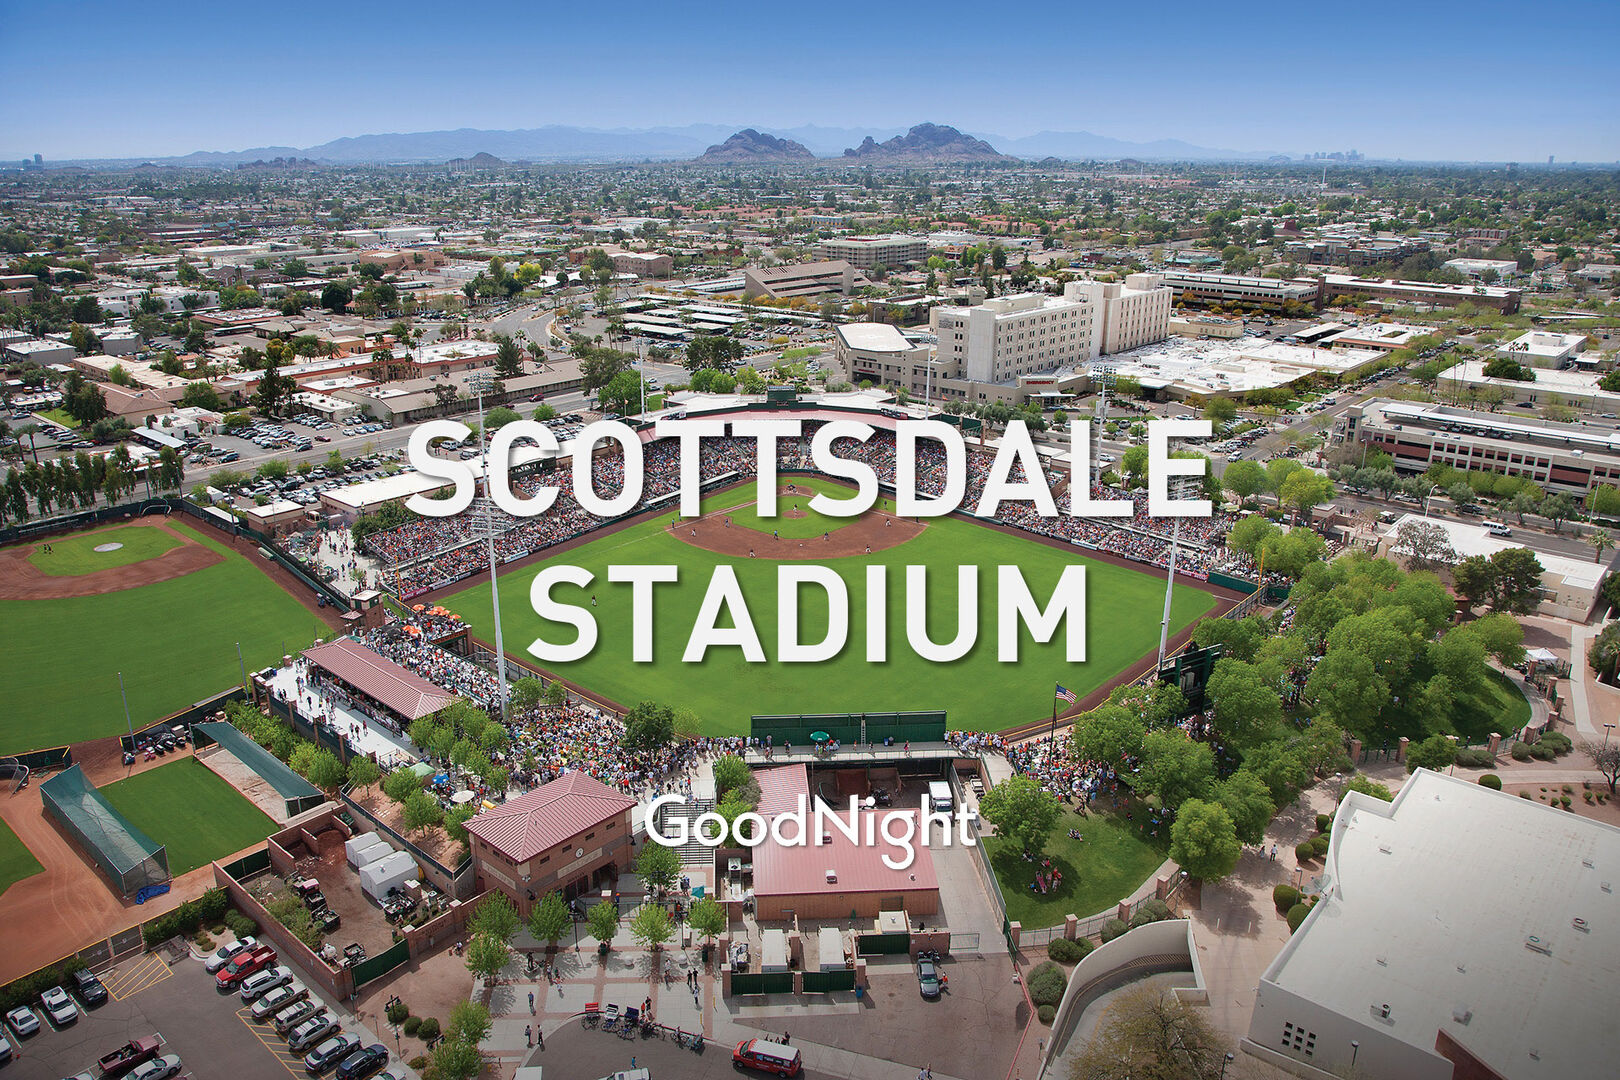 30 mins: Scottsdale Stadium - Home of the San Francisco Giants during Spring Training 2023